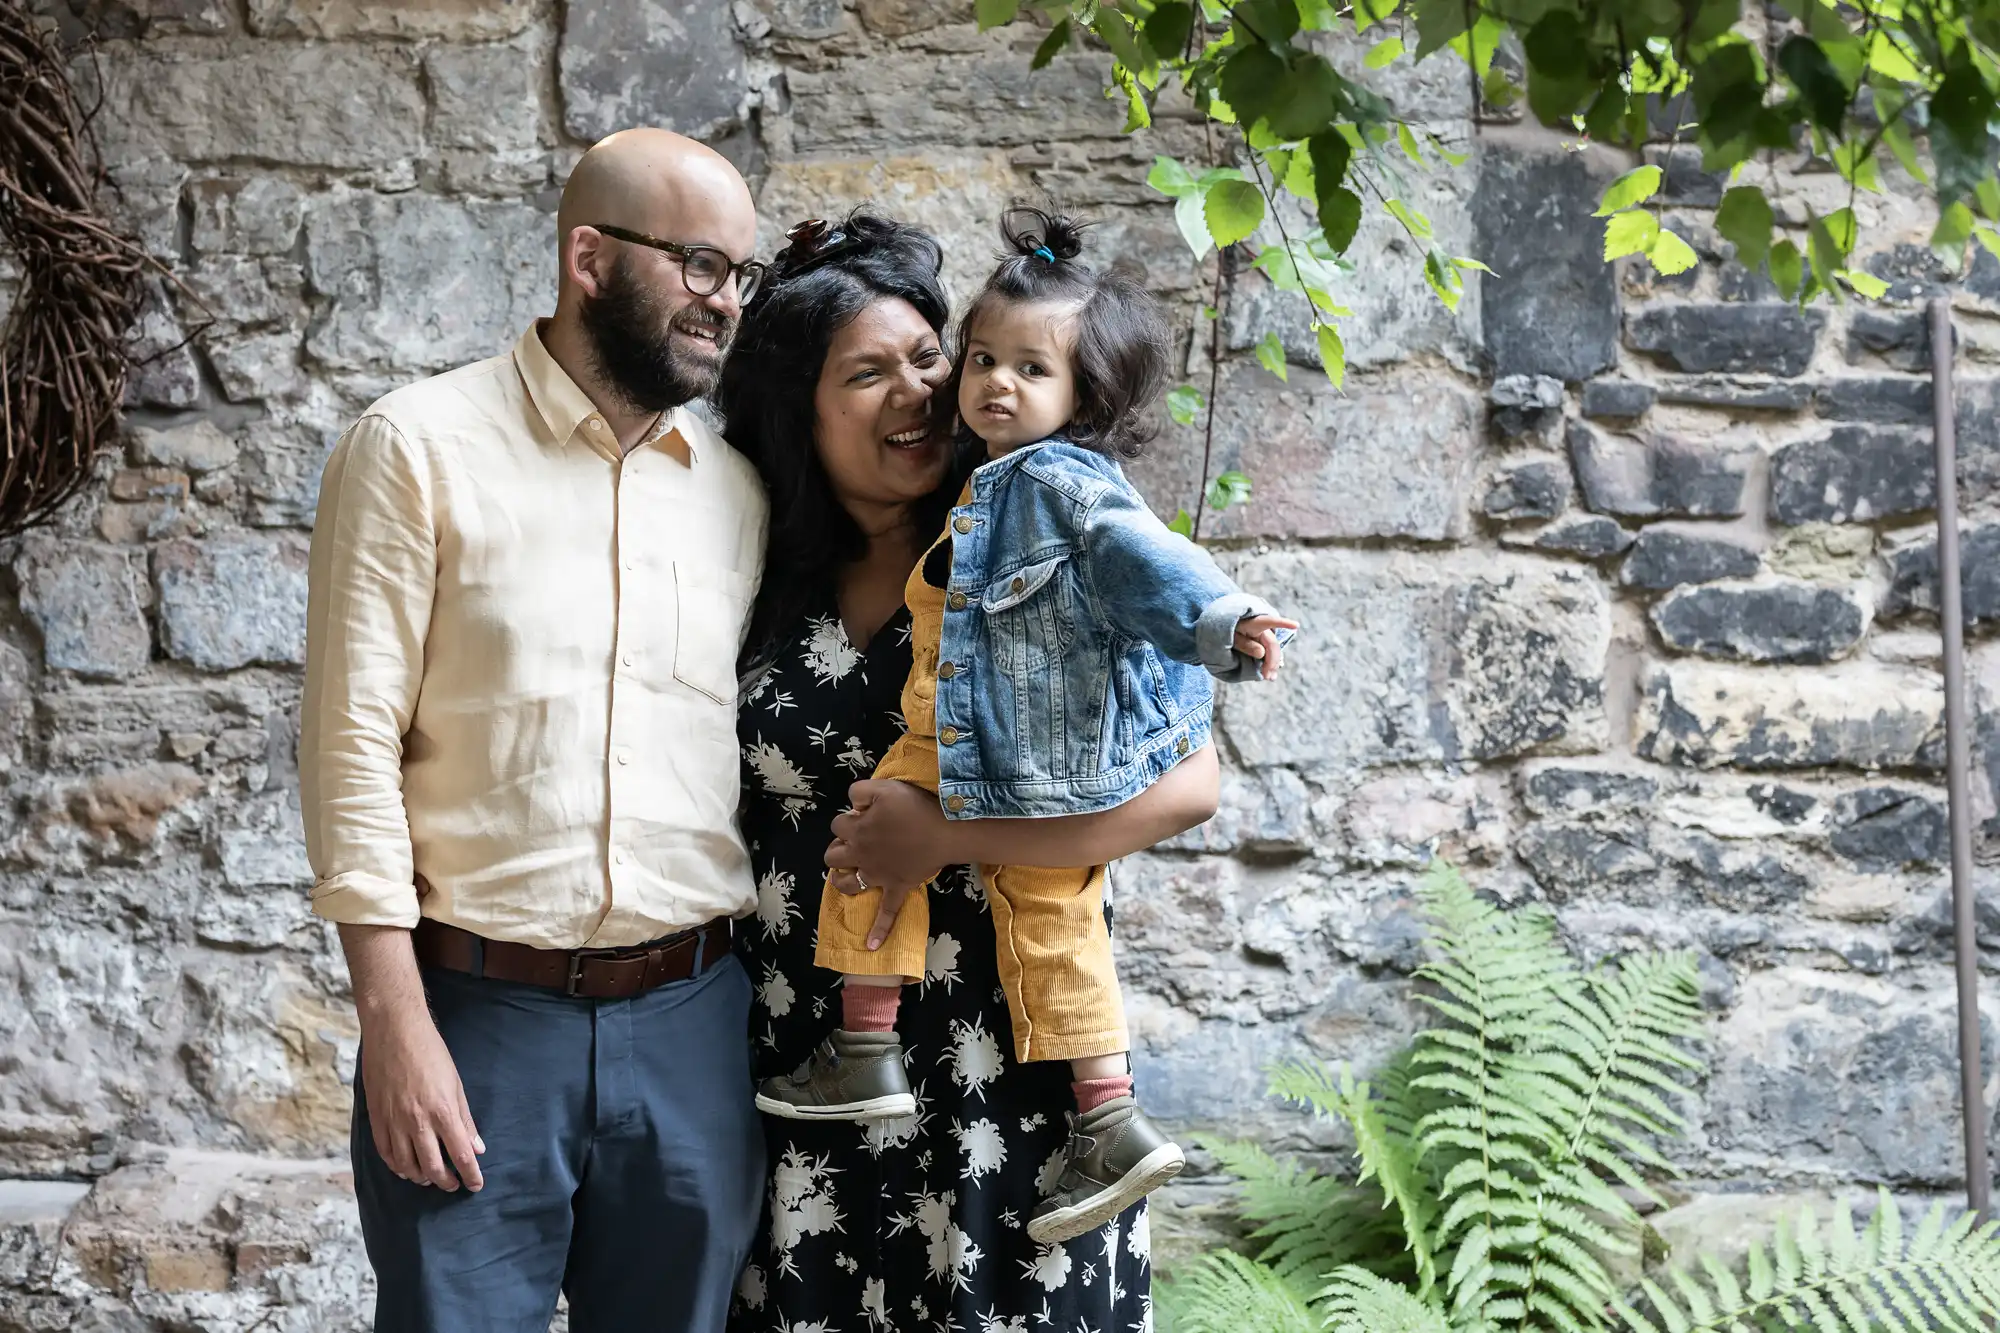 A family of three, including a bald man, a smiling woman, and a toddler, standing together against a stone wall with greenery.